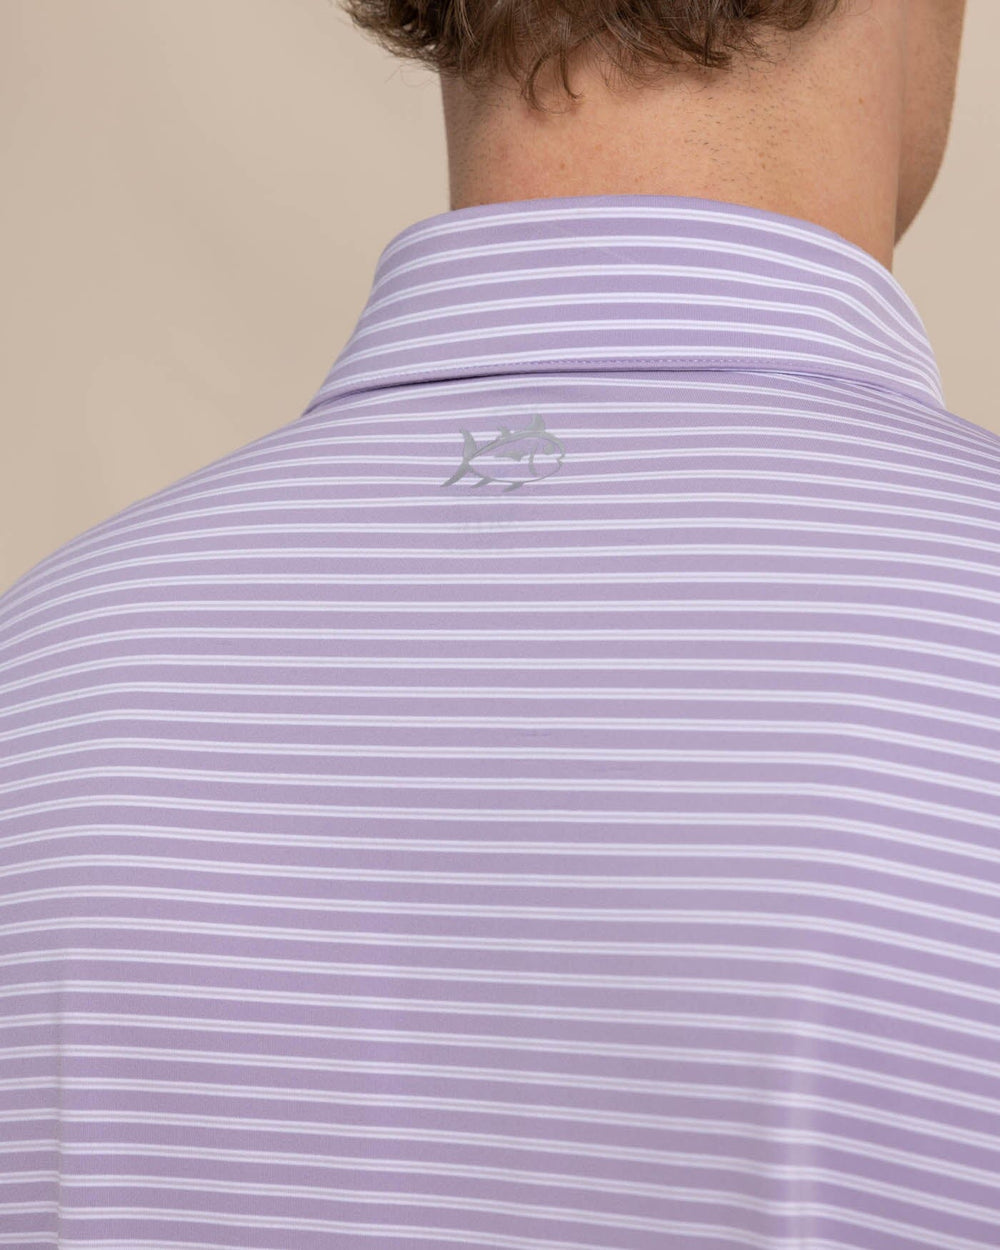 The detail view of the Southern Tide brrr eeze Beattie Stripe Performance Polo by Southern Tide - Wisteria Purple